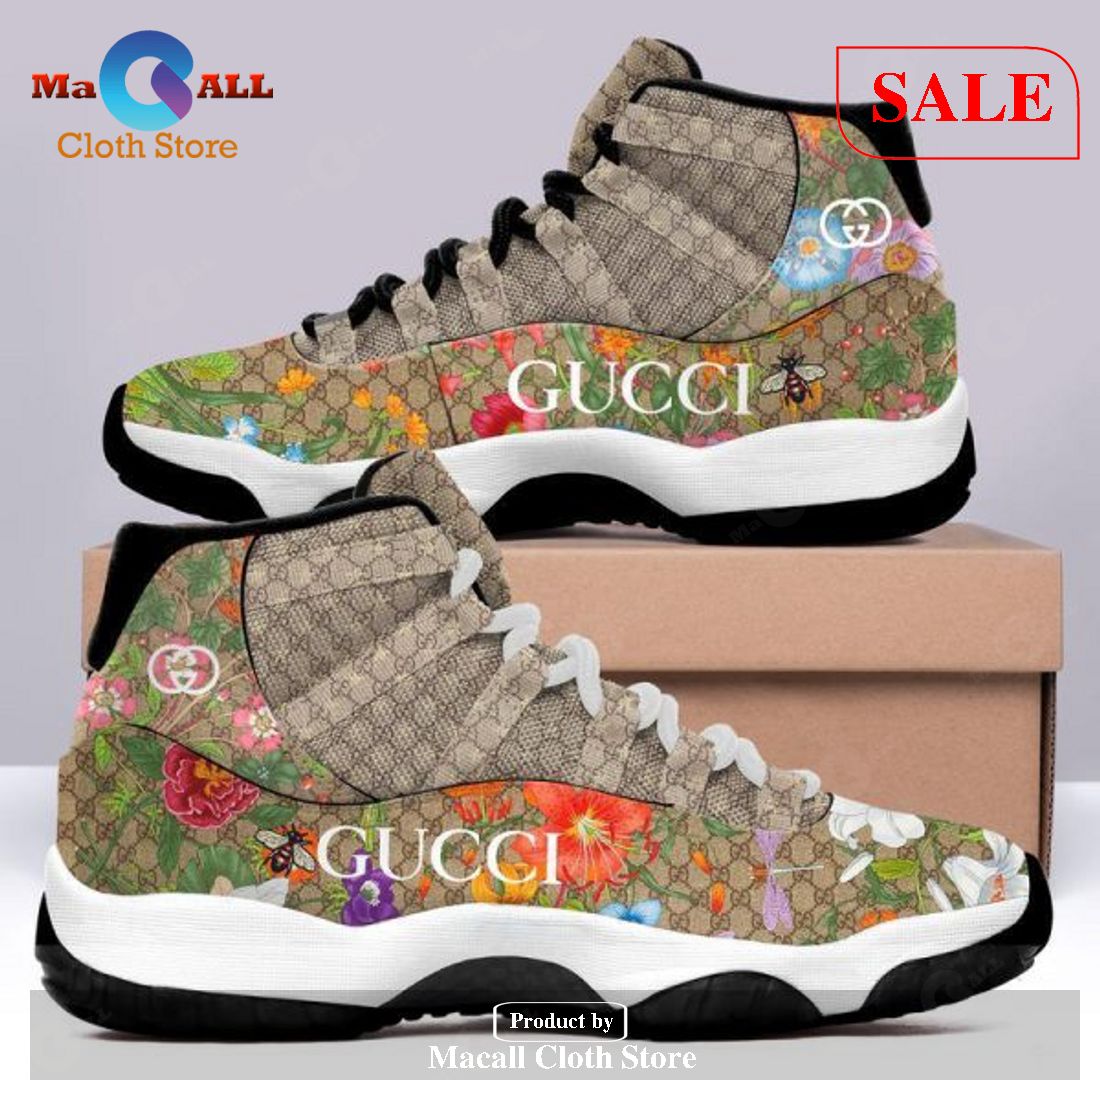 SALE] Gucci Luxury Air Jordan 11 Shoes Hot 2023 Gucci Sneakers Gifts For Men  Women POD Design - Macall Cloth Store - Destination for fashionistas